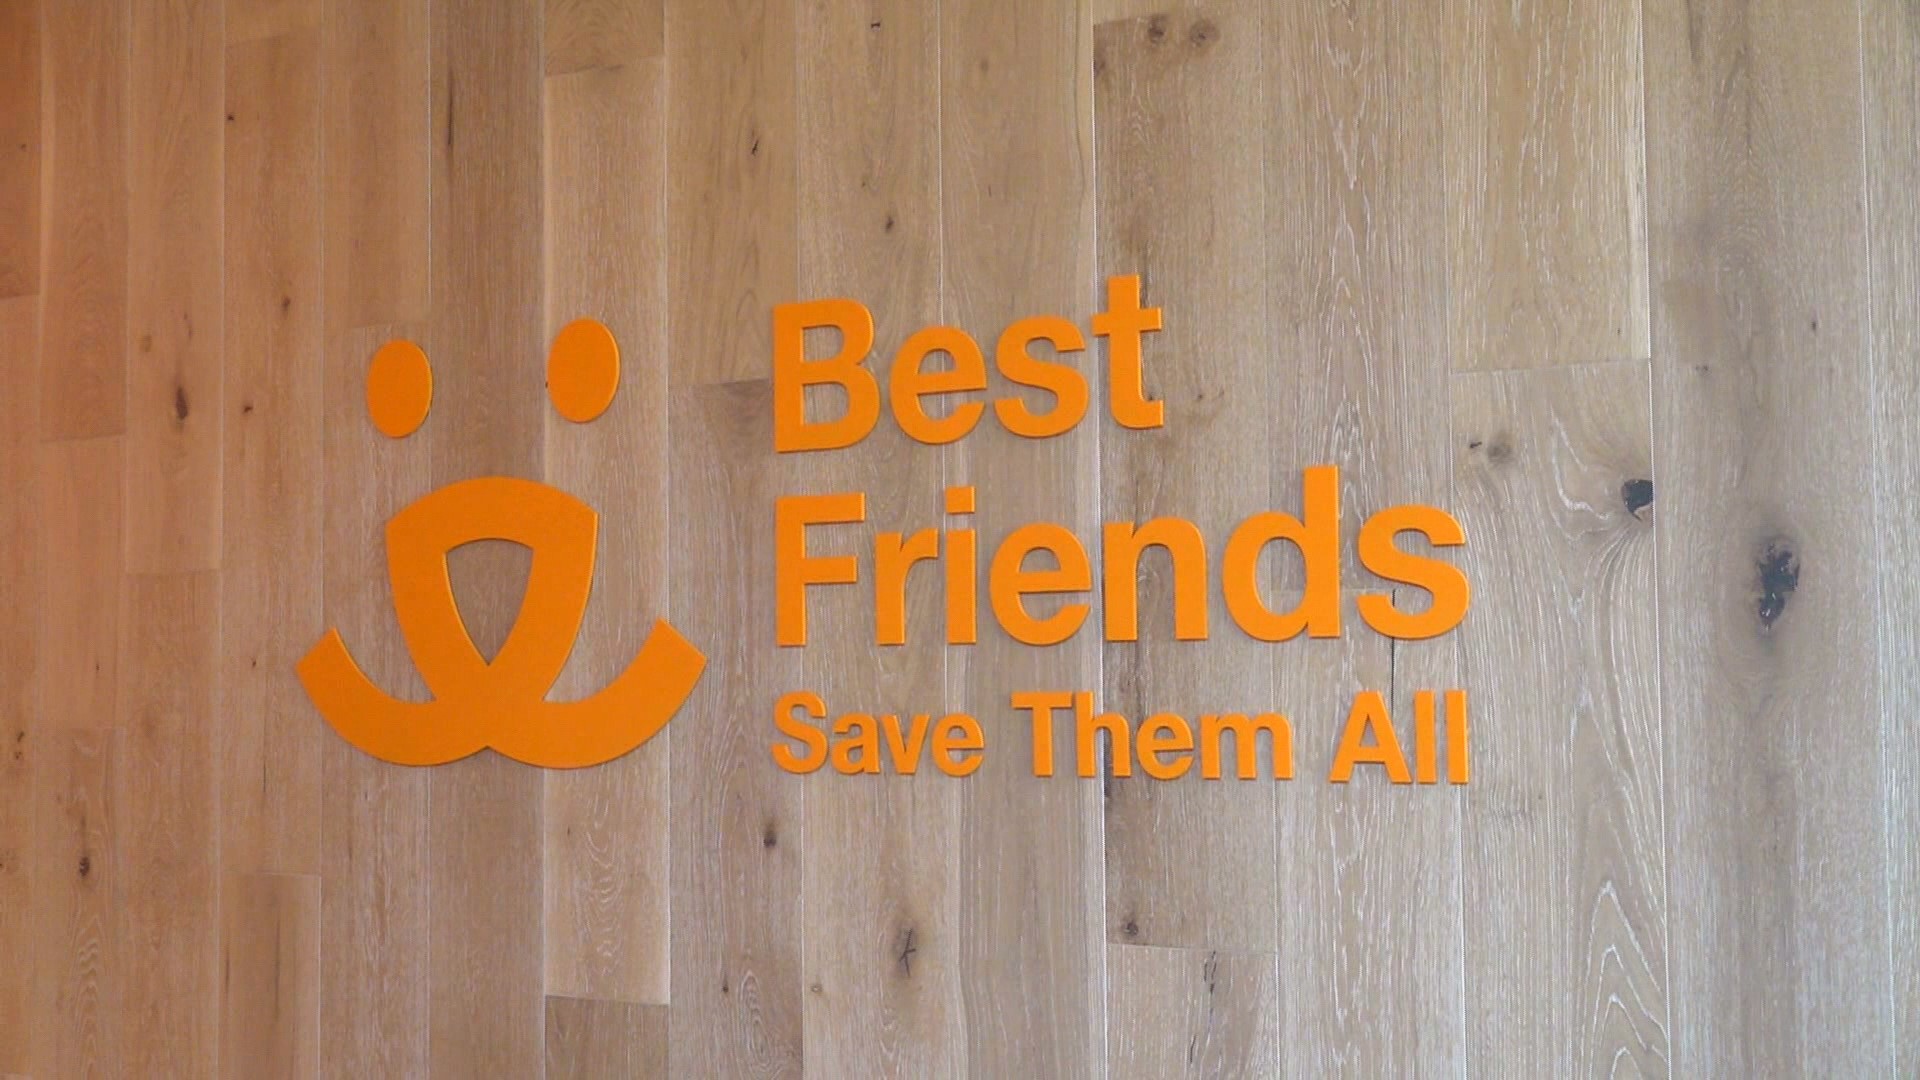 Best Friends offers pet adoption services as well as fostering for families interesting in a furry new member. 🐾